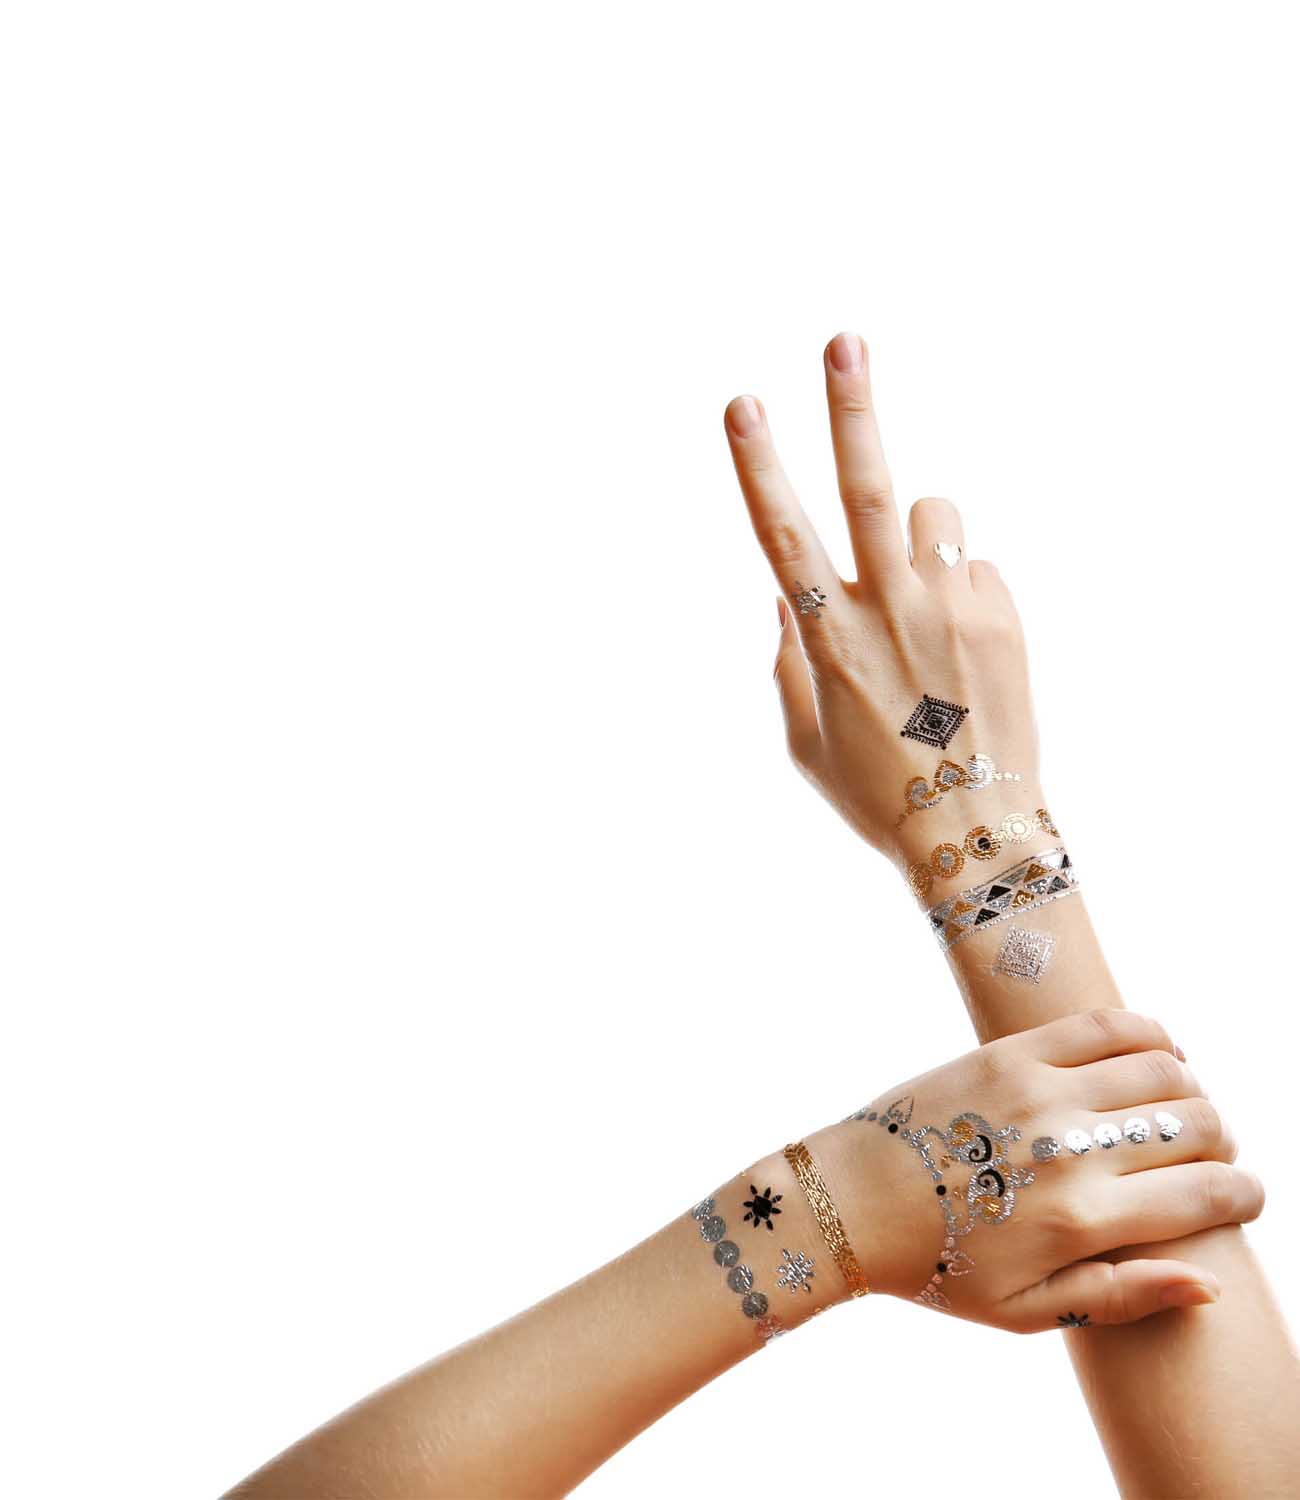 Temporary Custom Tattoos For Your Sexy Self - This is so Fun